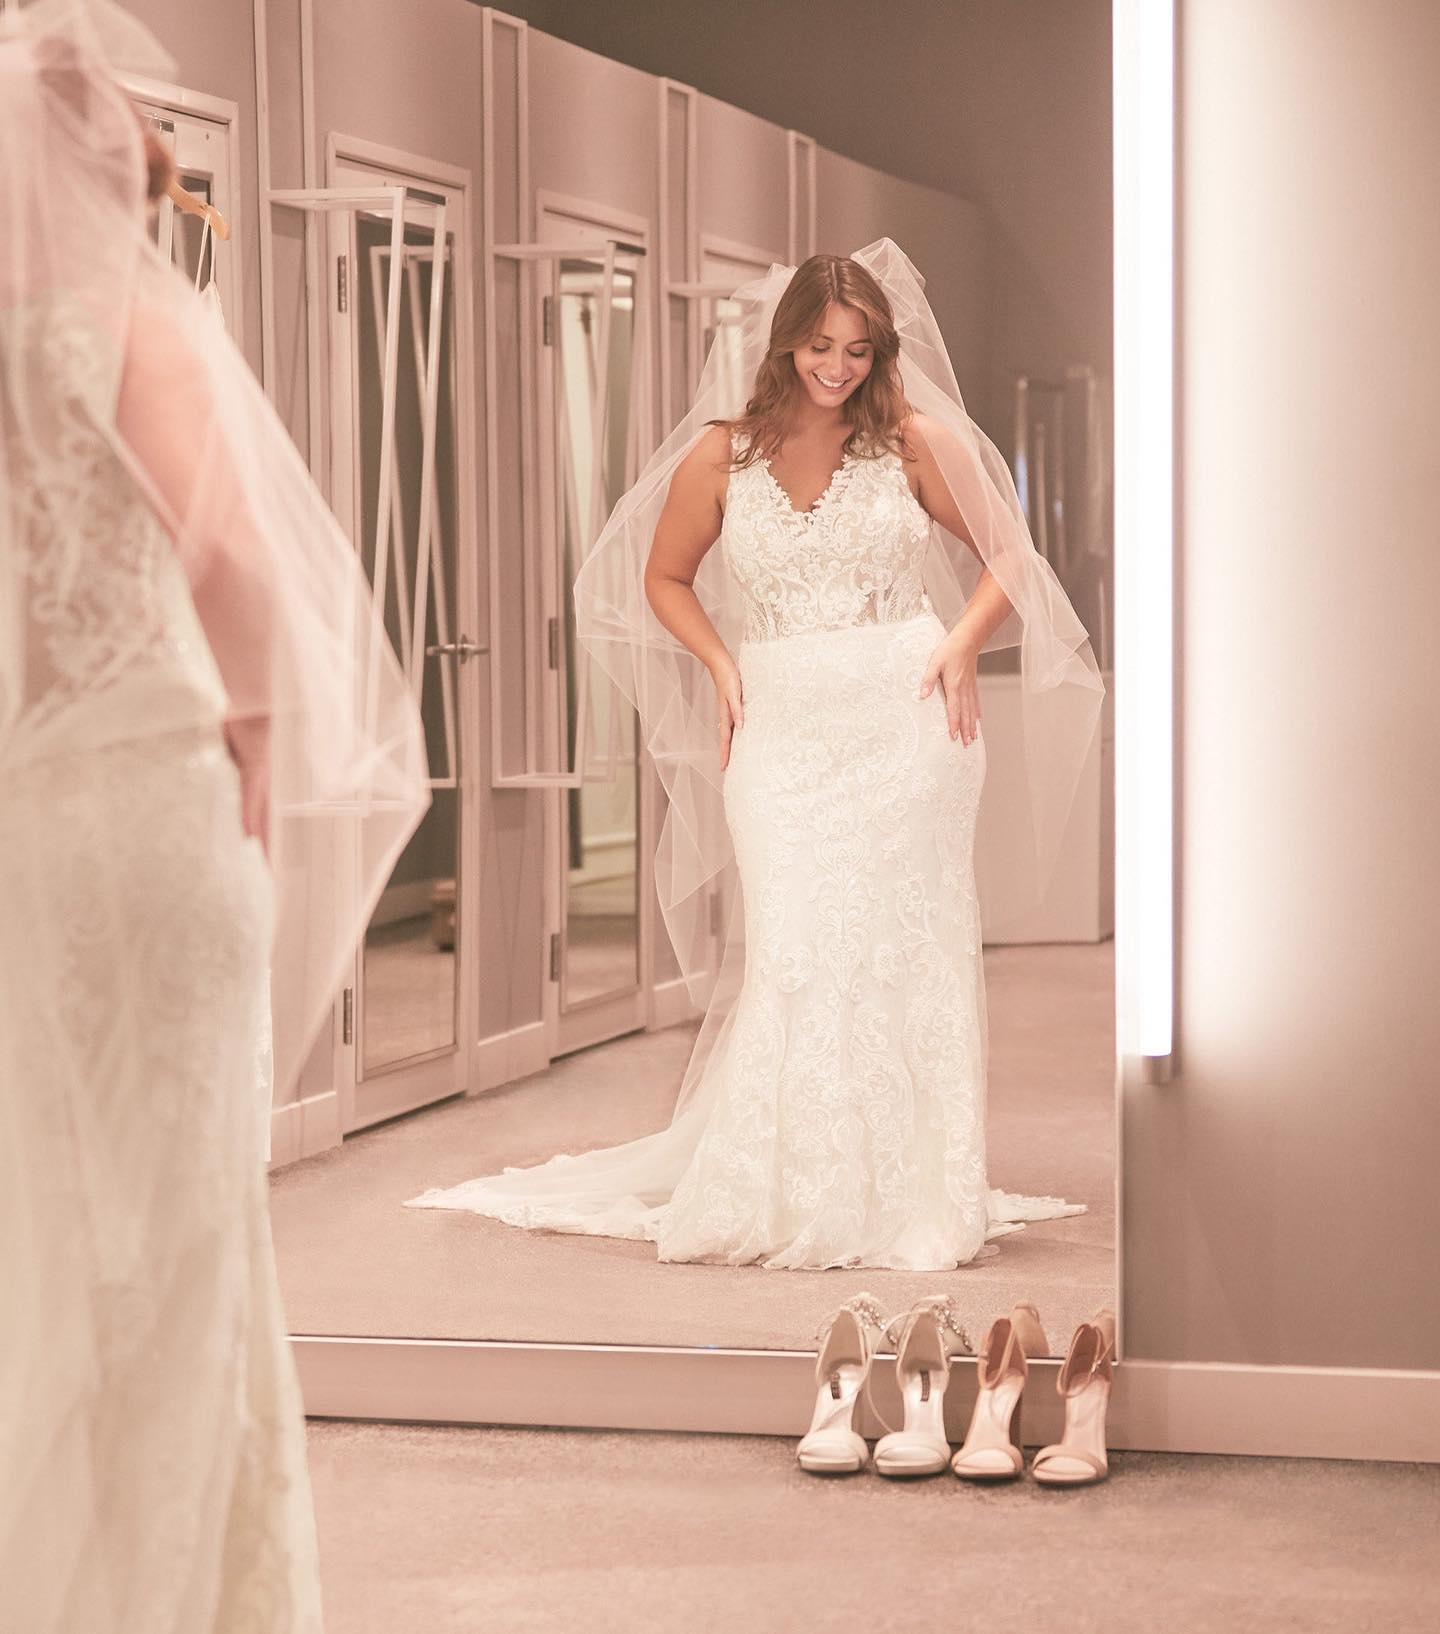 Here's the Average Wedding Dress Cost in 2023 (Plus Ways to Save) - Zola  Expert Wedding Advice